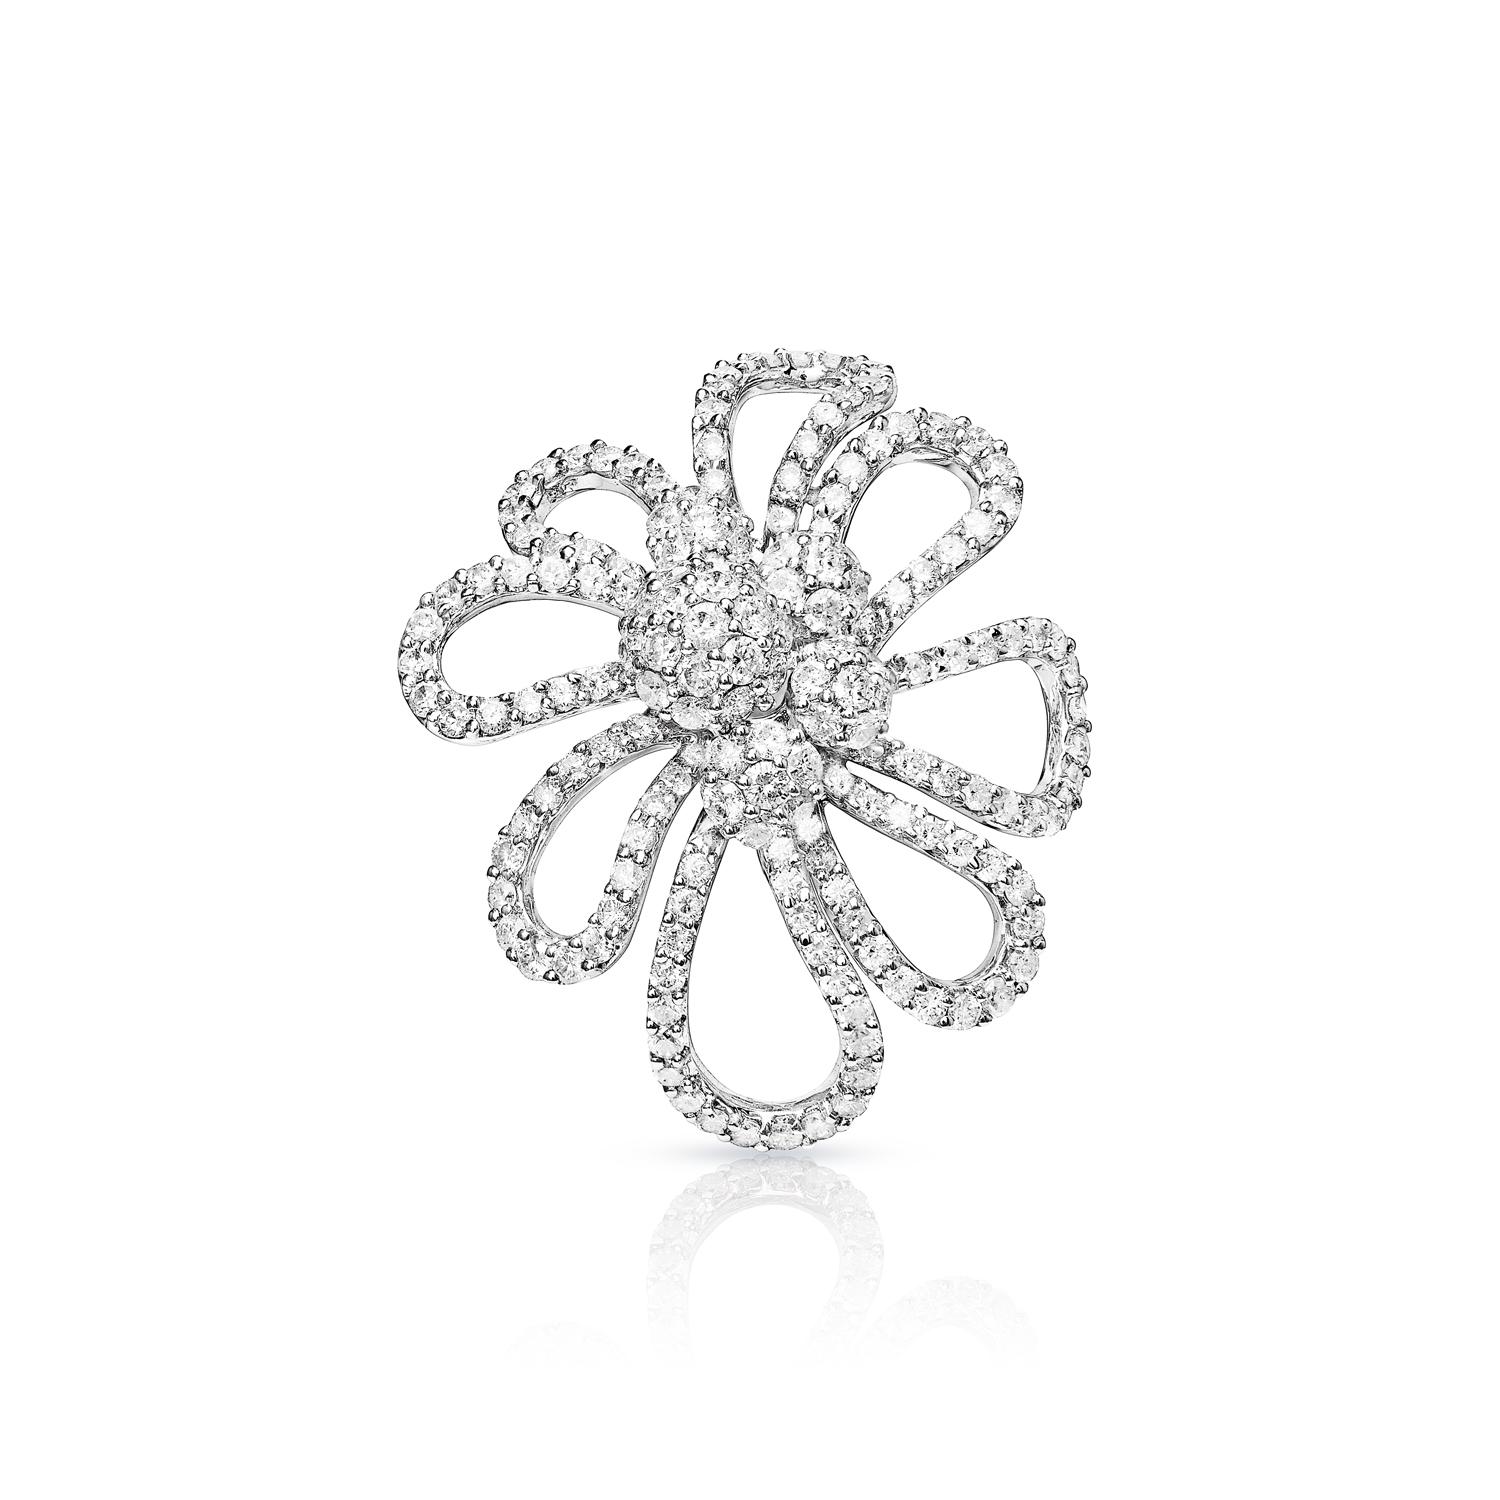 This ring is truly something special, and not just because it is Certified. The ring features a beautiful round brilliant-cut diamonds, flanked by smaller diamonds. The band is made of 14k white gold and is simple yet elegant. This ring is the